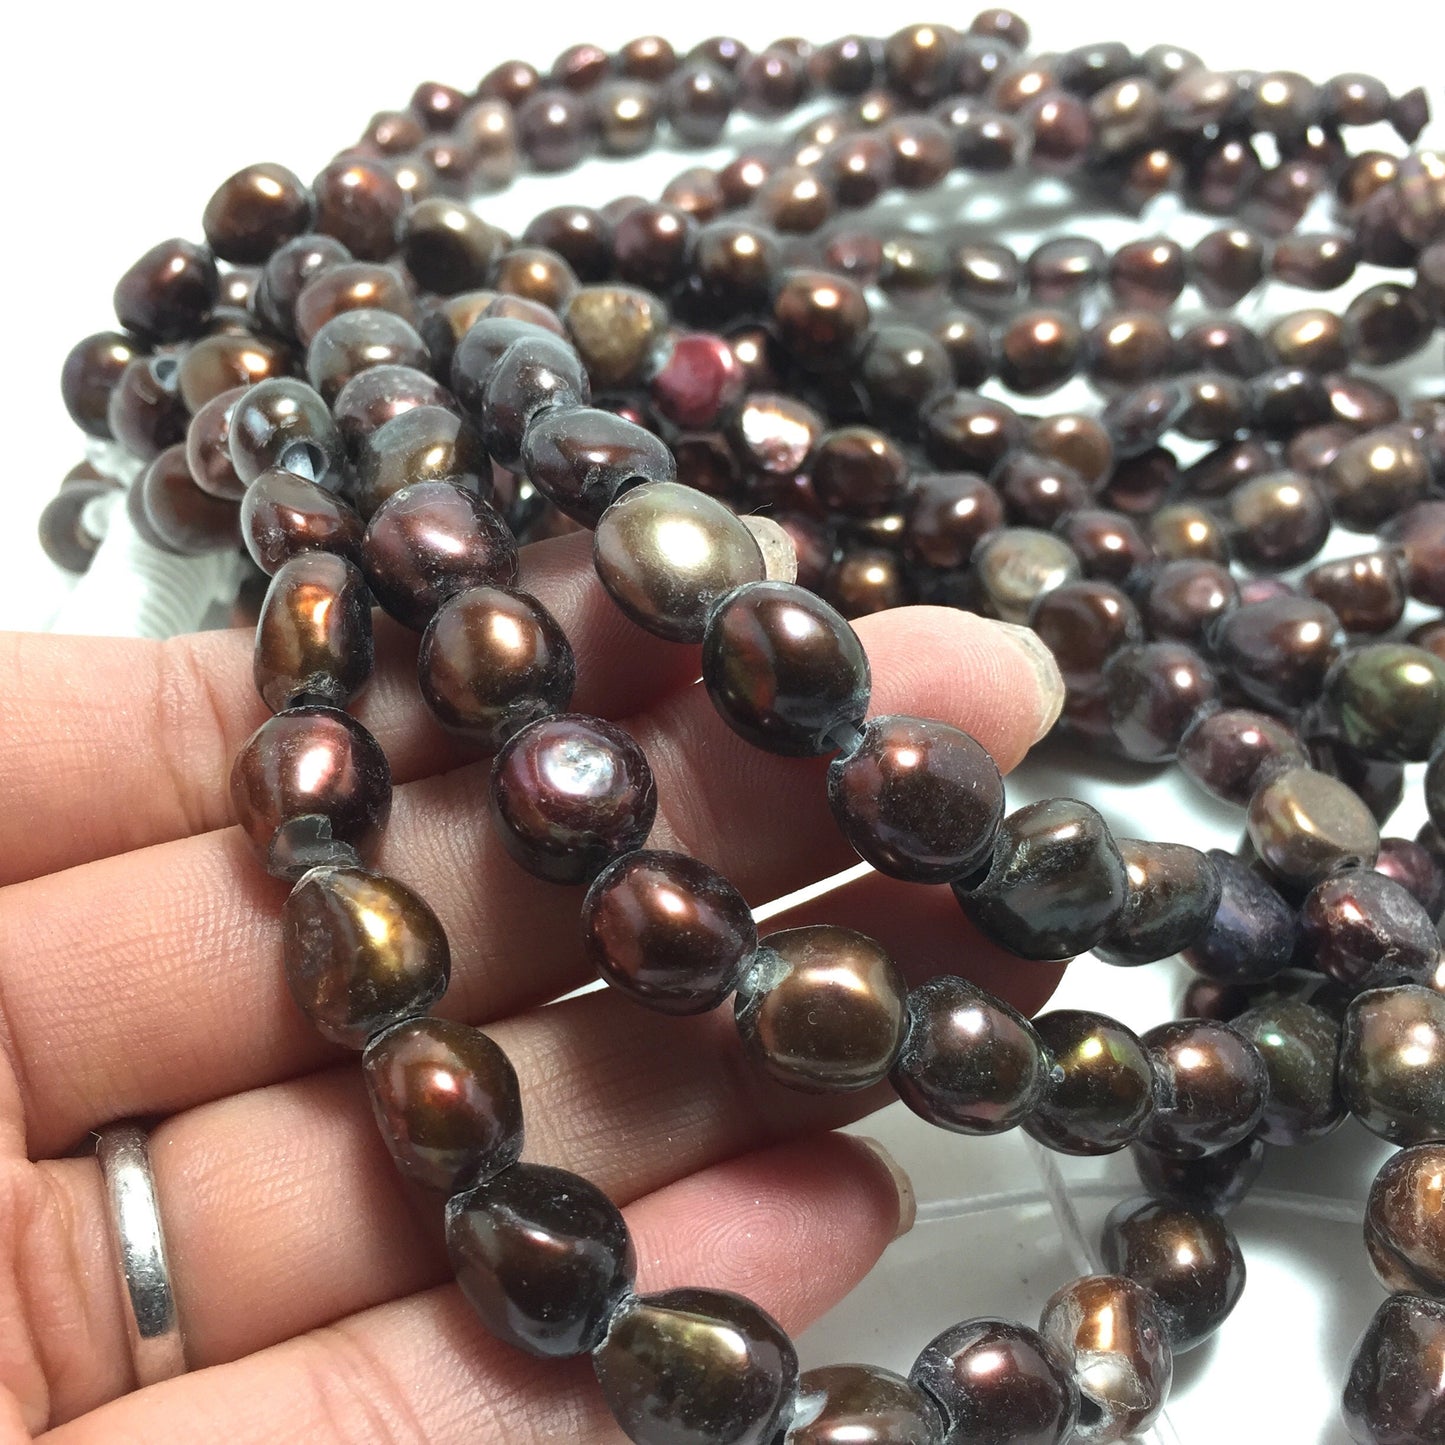 Large Hole Pearls, 9-10mm Nugget Rice Shape, Dark Chocolate Color Freshwater Pearls, 8 inches strand with 2.5mm Hole Size, LH079